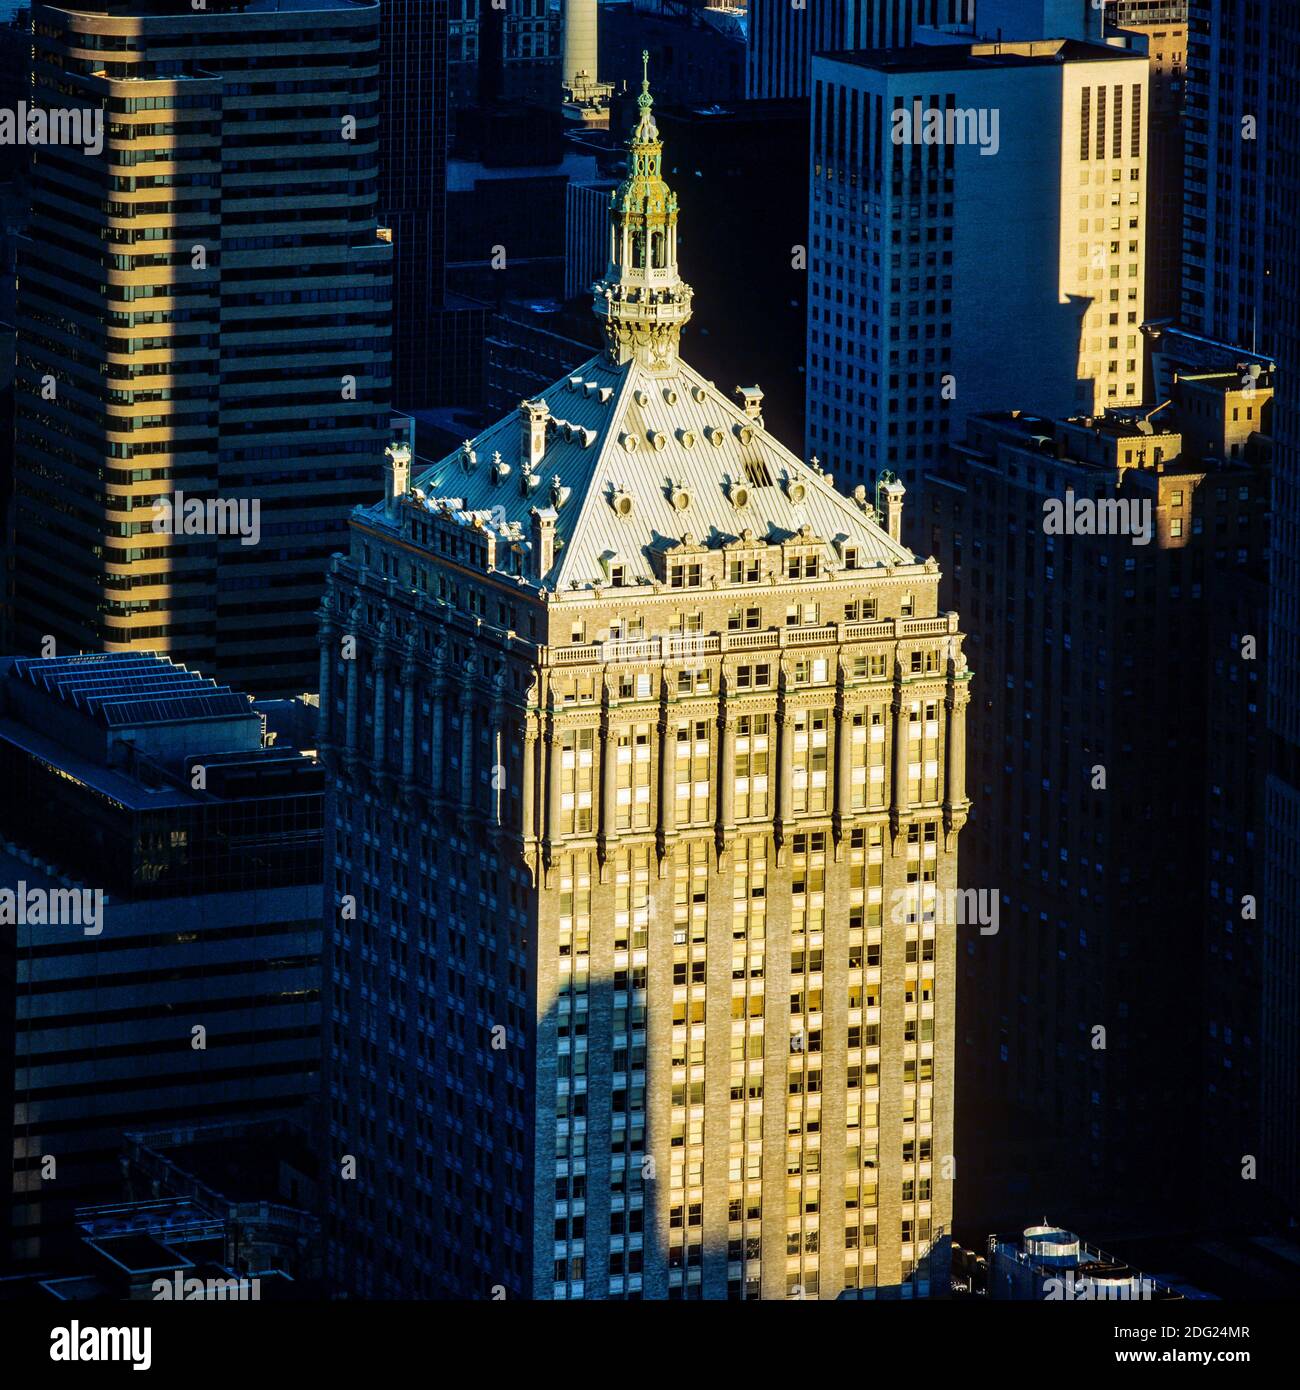 New York 1985, top of the Helmsley building at sunset, Manhattan, New York City, NY, NYC, USA, Stock Photo